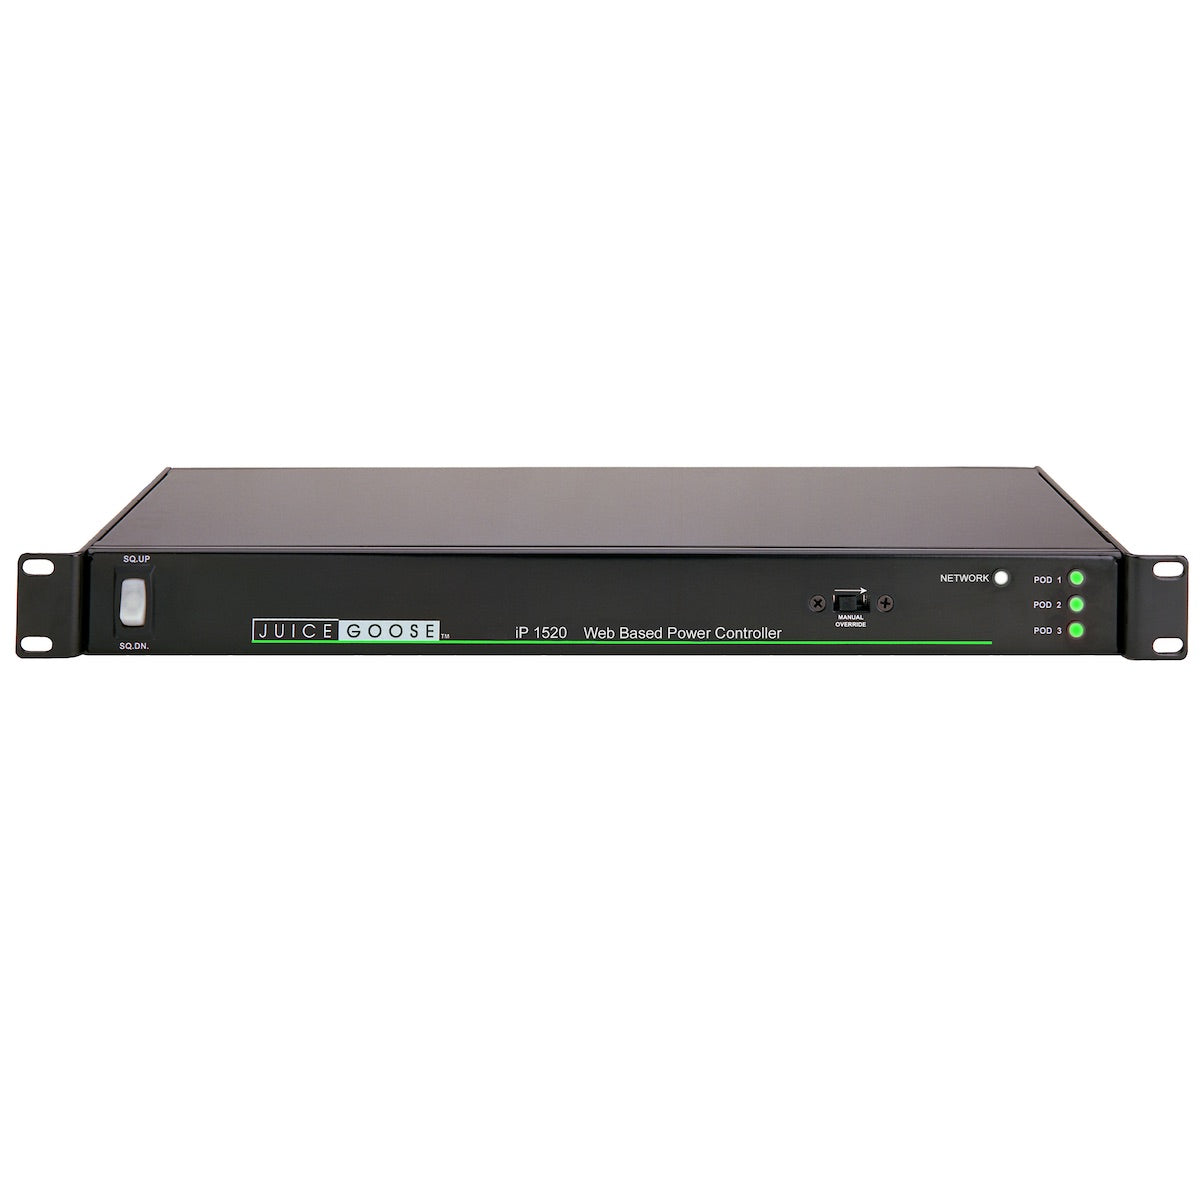 Juice Goose iP 1520 - 20A Rack Mount Web Based Power Controller, front